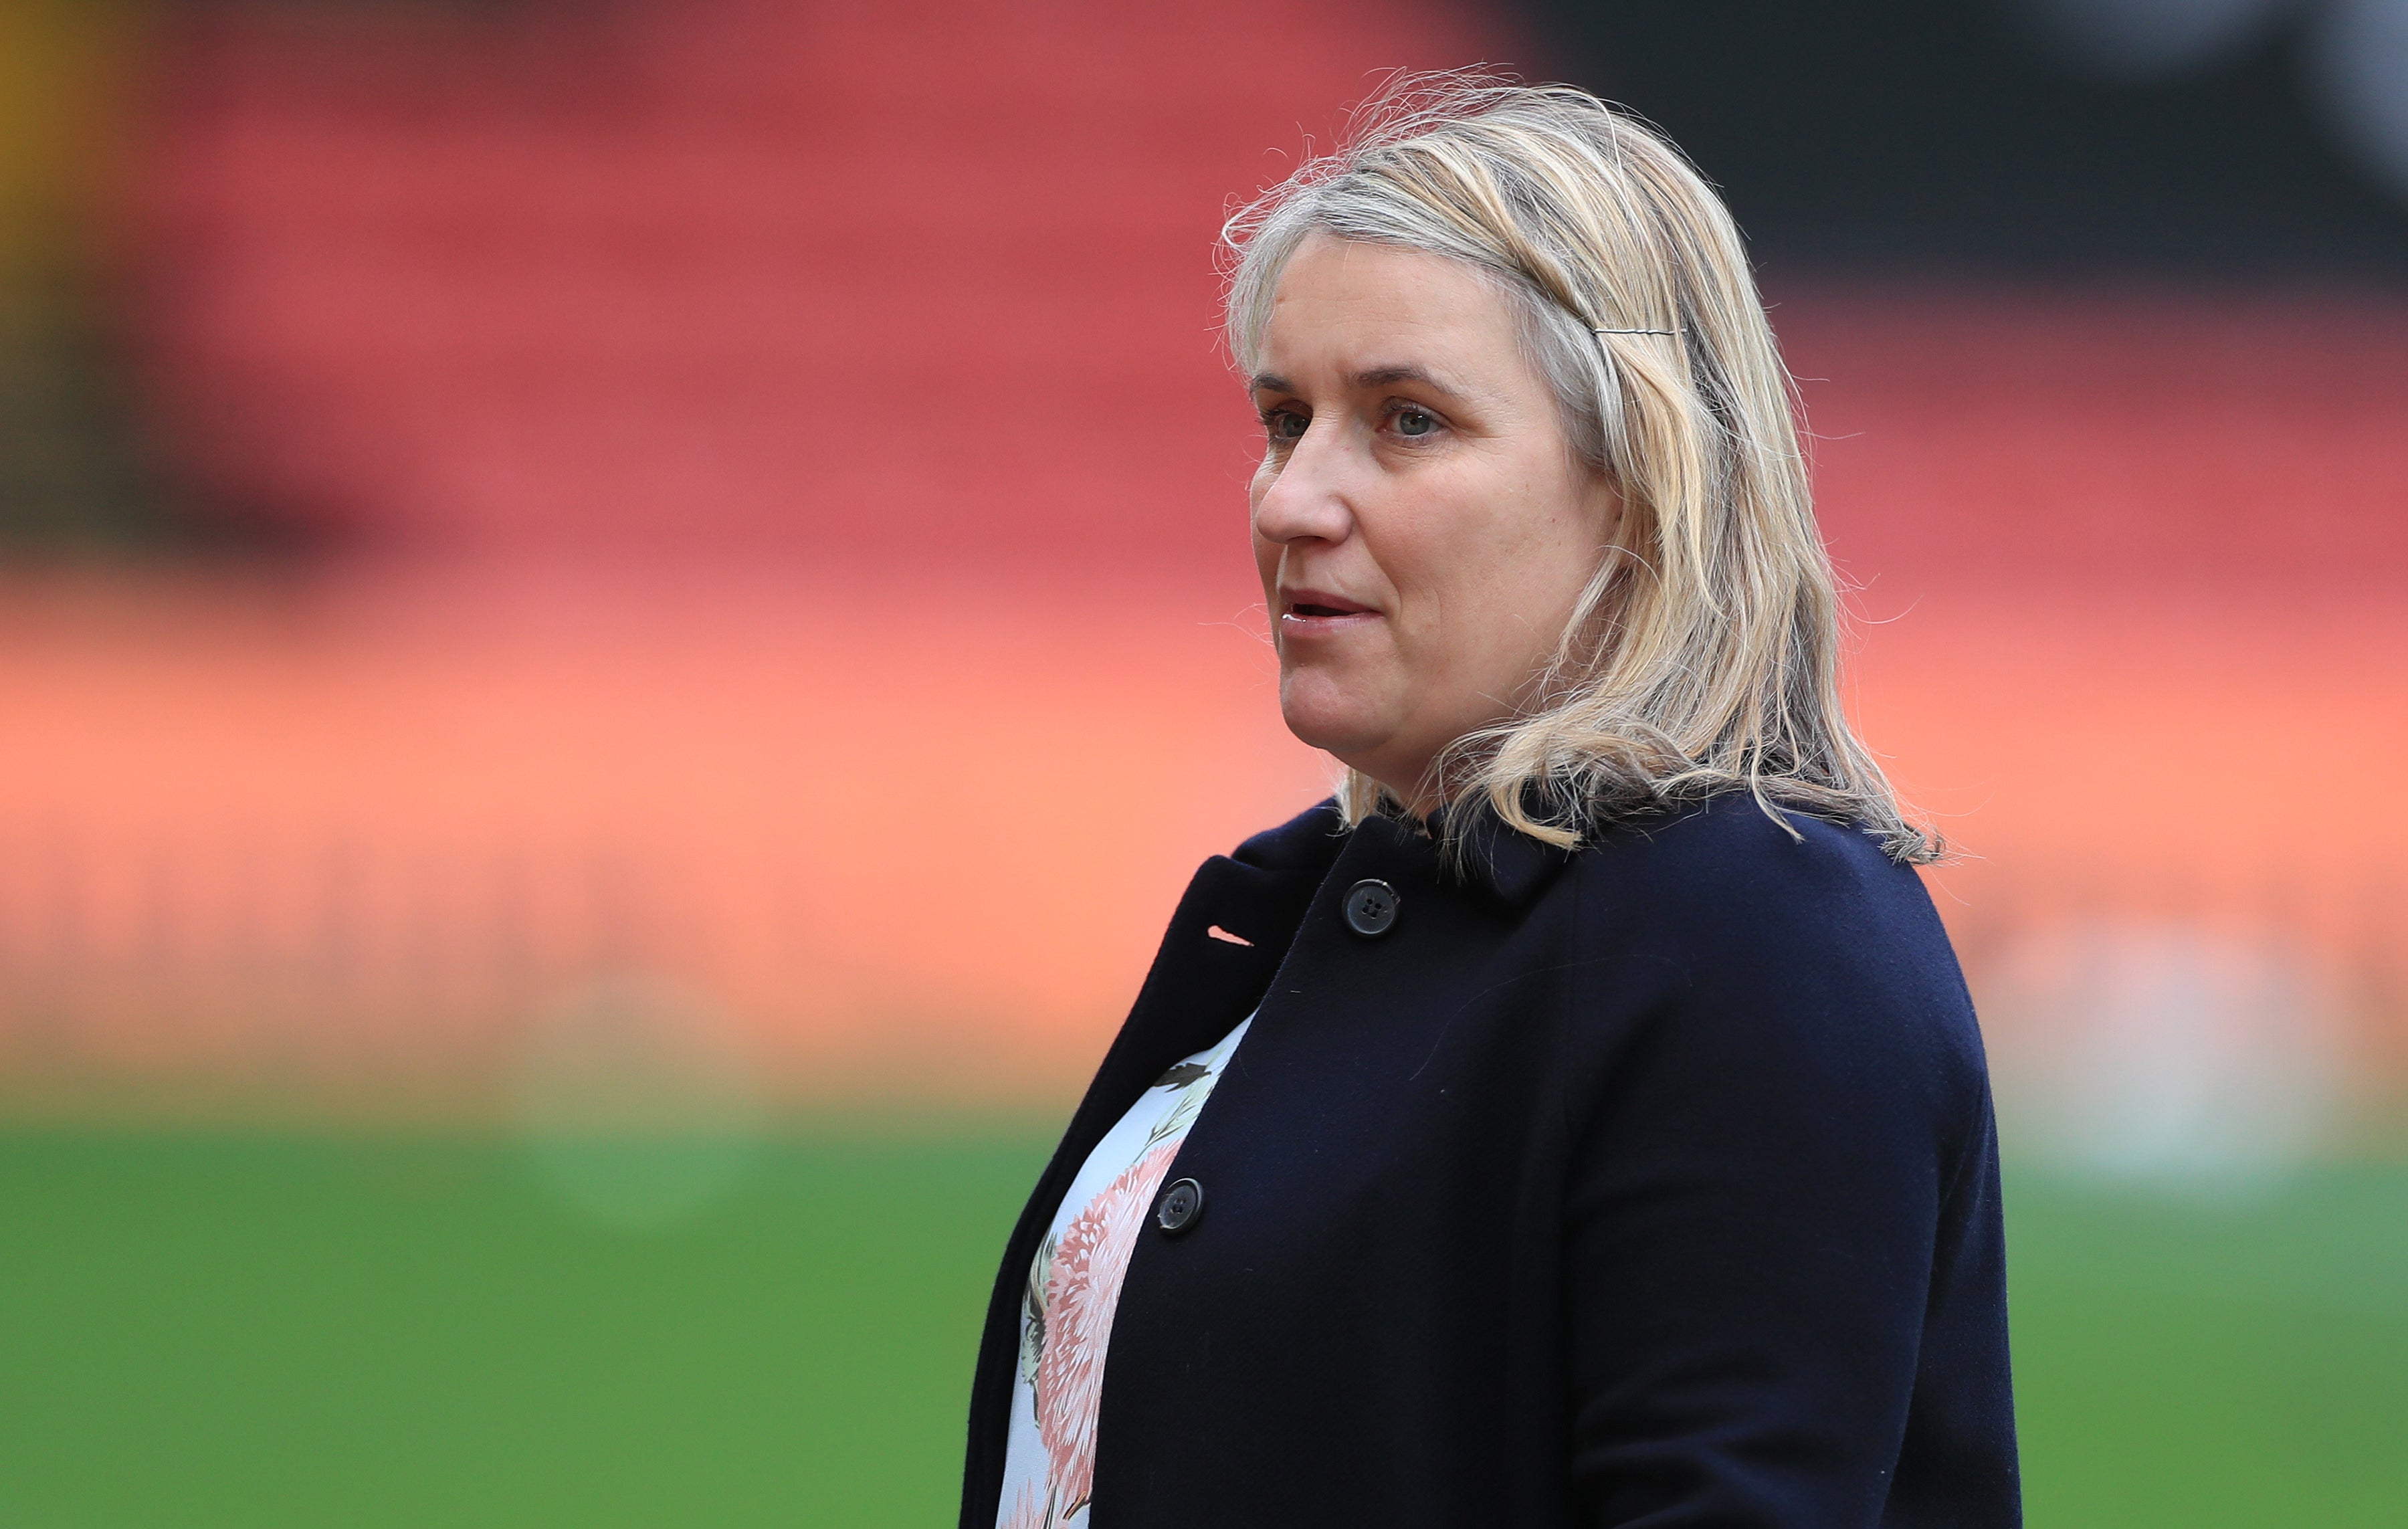 Chelsea Women manager Emma Hayes was critical of even the increased prize money for Euro 2022 (Mike Egerton/PA)